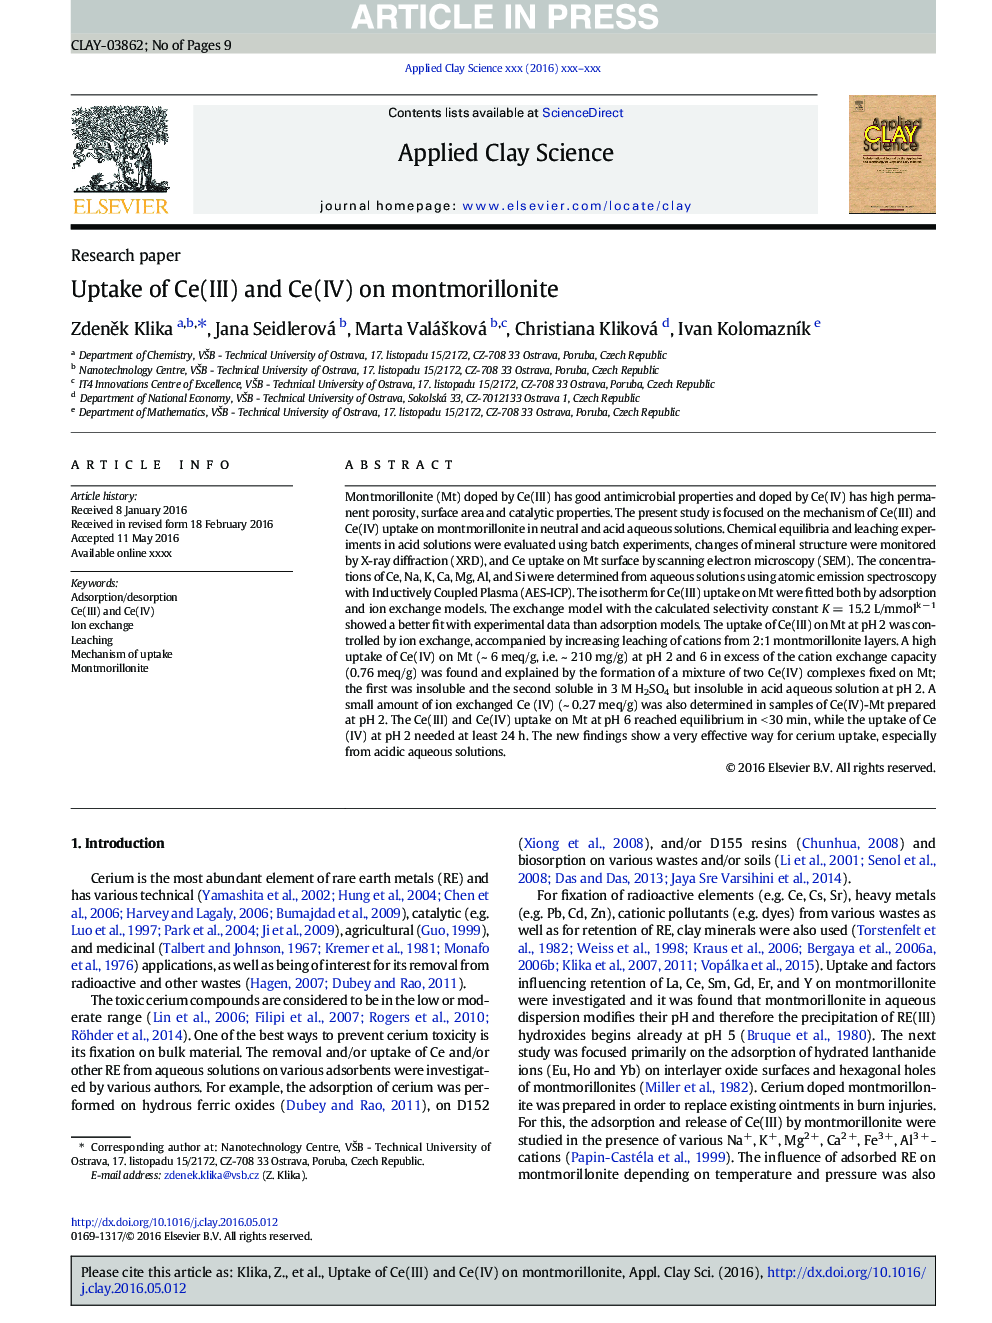 Uptake of Ce(III) and Ce(IV) on montmorillonite